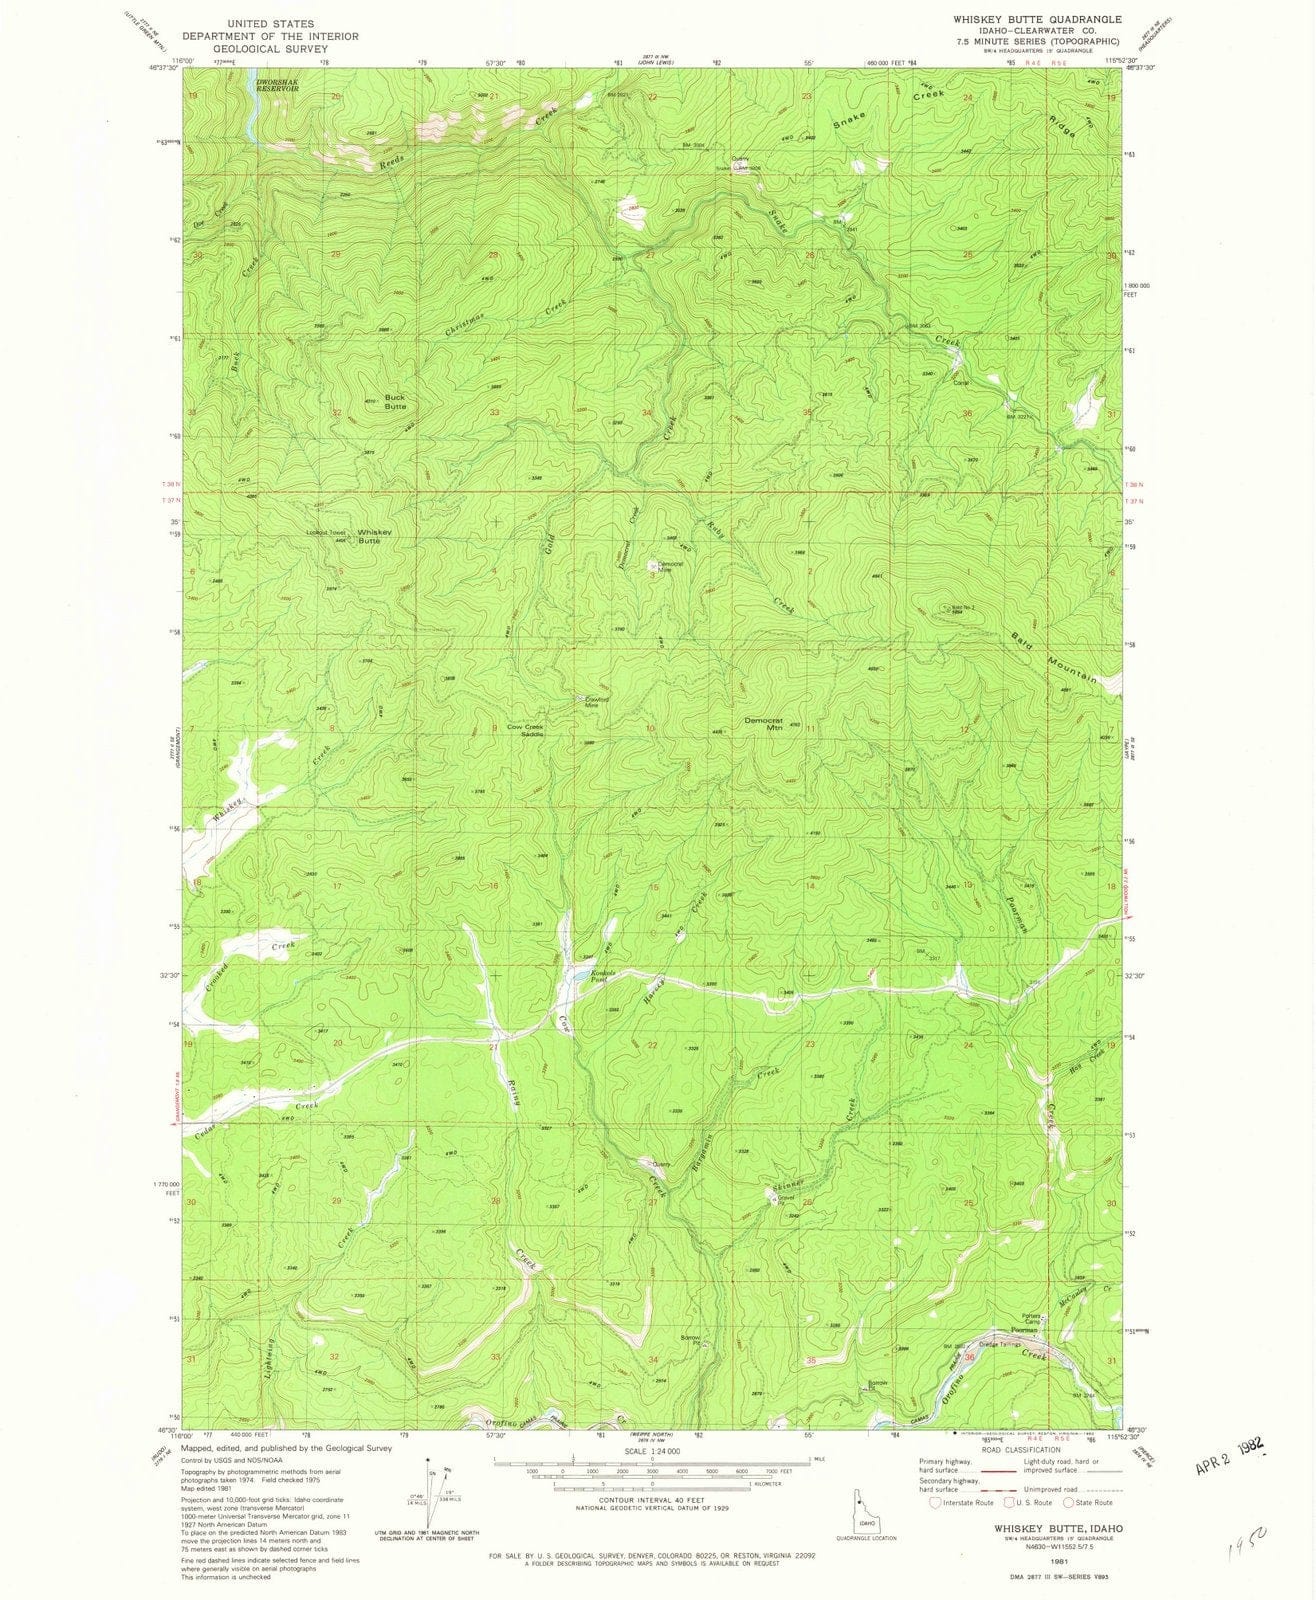 1981 Whiskey Butte, ID - Idaho - USGS Topographic Map